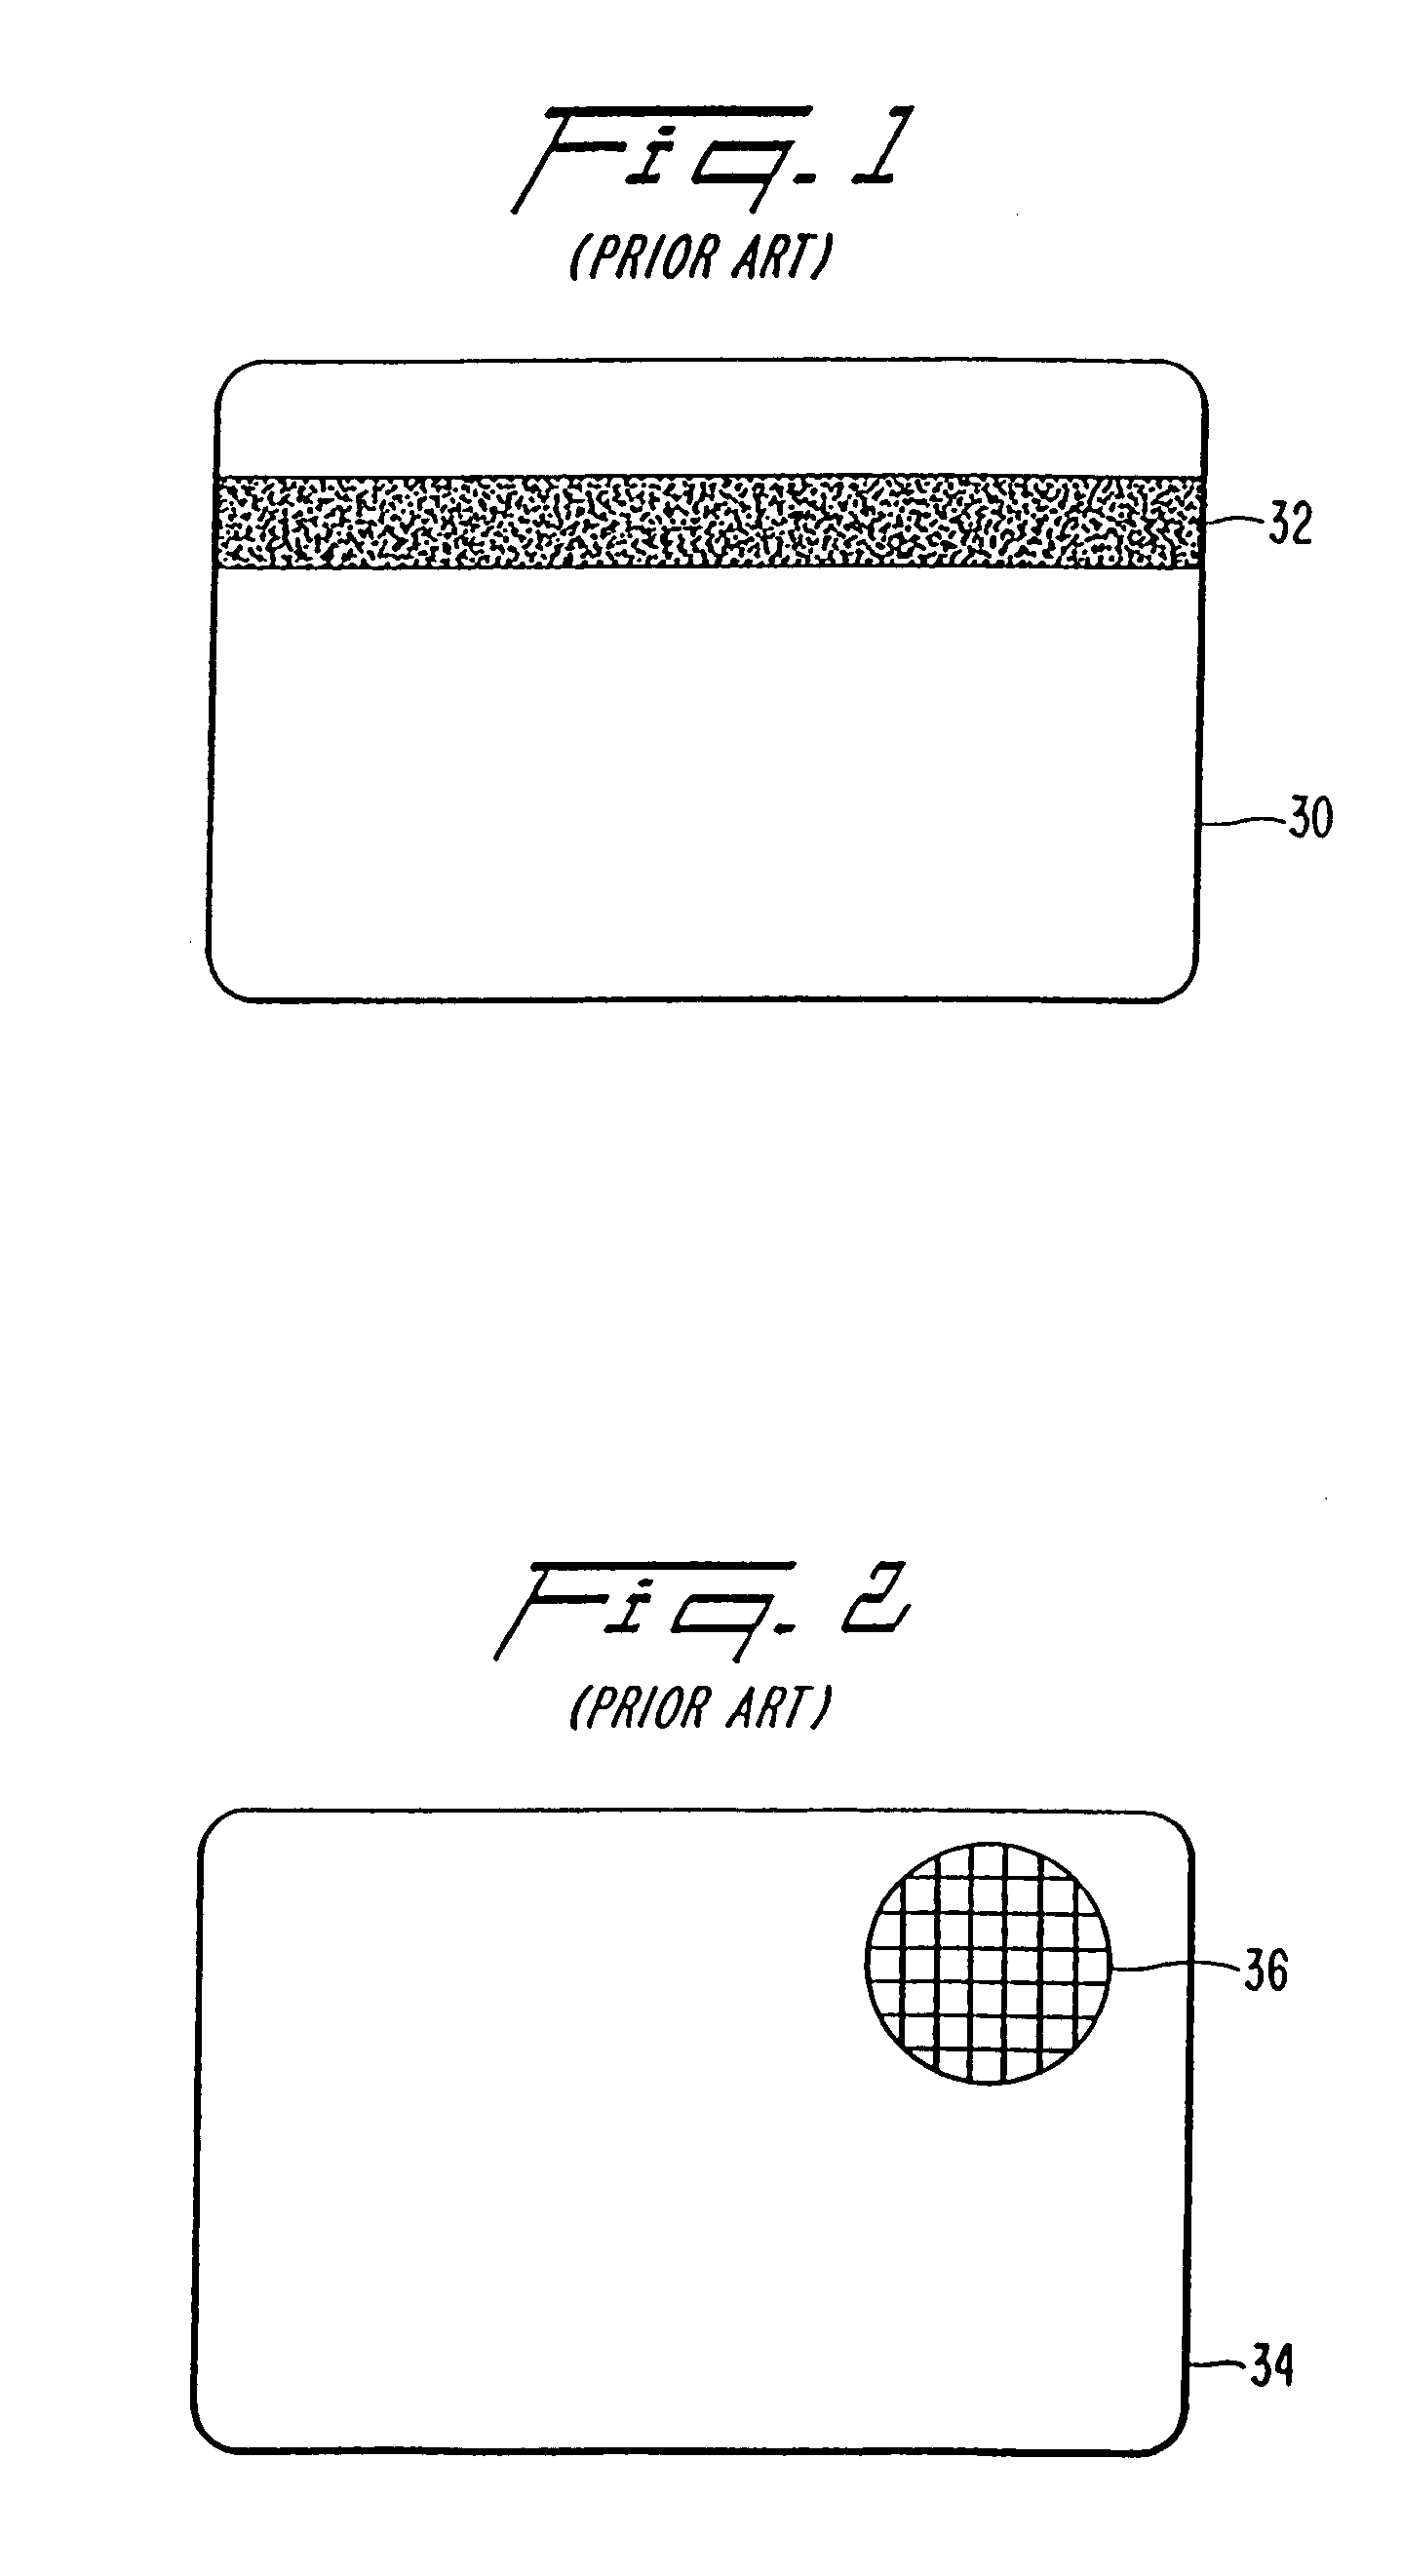 Removable card for use in a radio unit